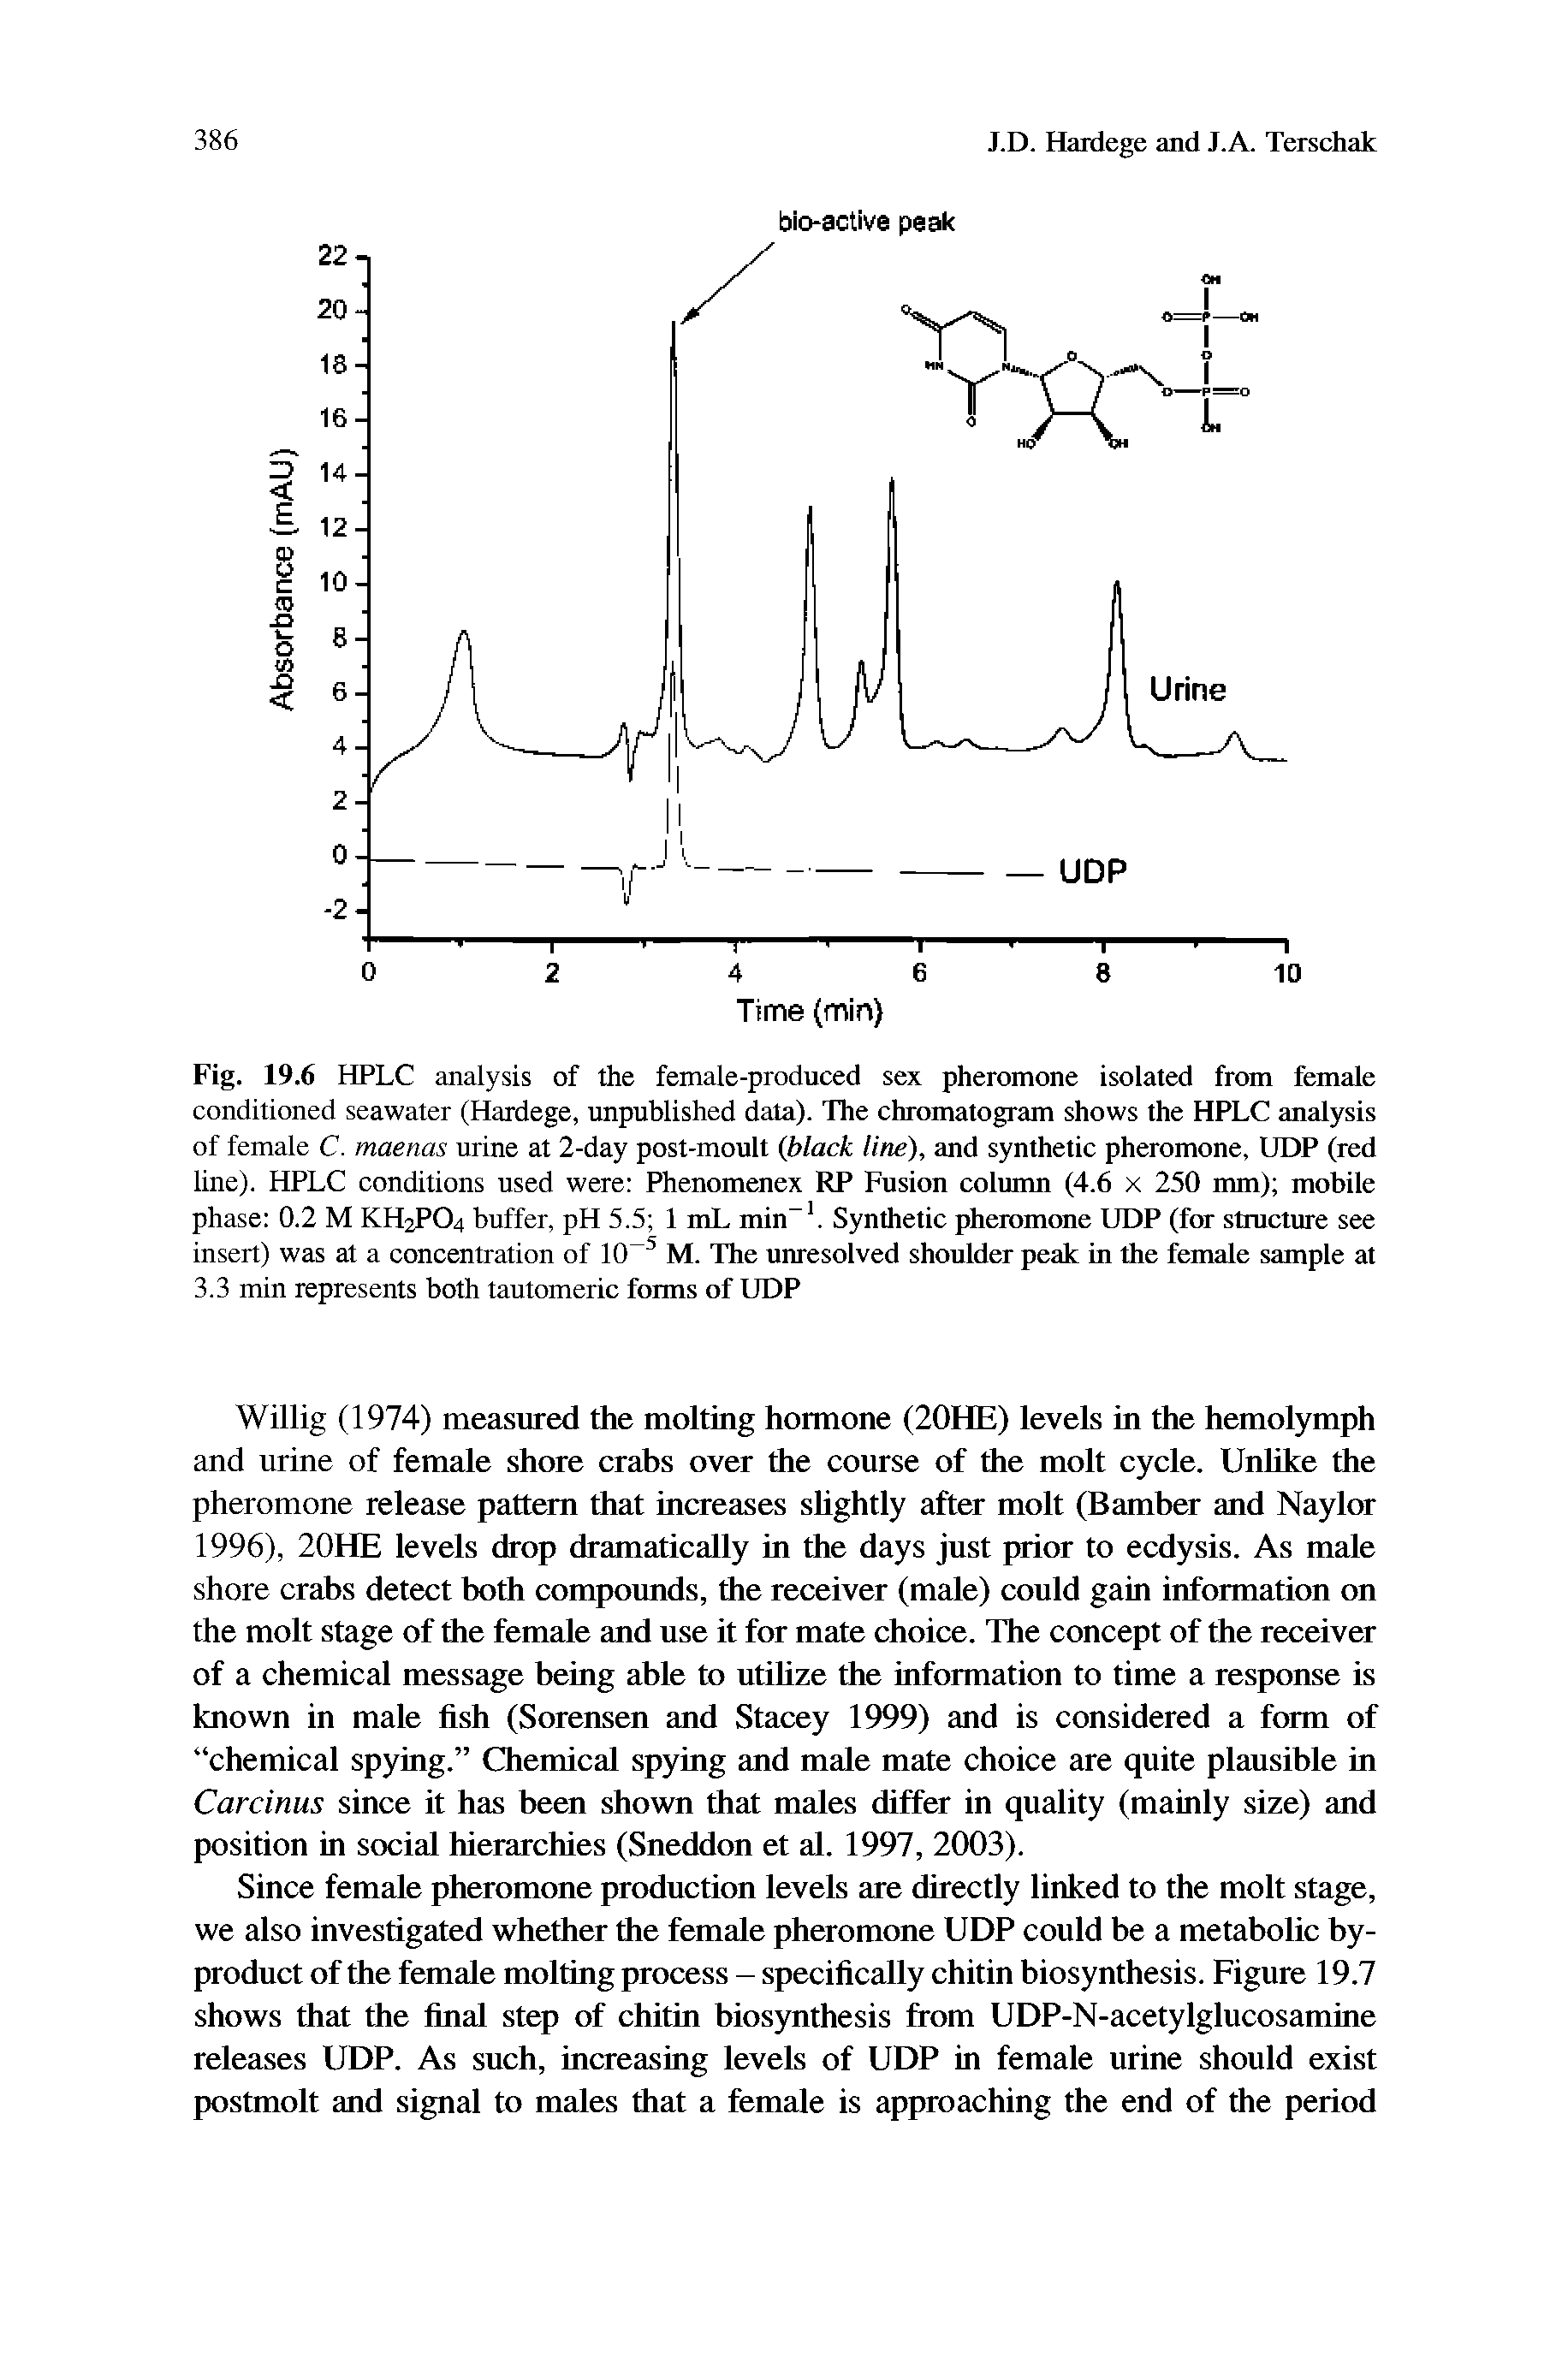 Fig. 19.6 HPLC analysis of the female-produced sex pheromone isolated from female conditioned seawater (Hardege, unpublished data). The chromatogram shows the HPLC analysis of female C. maenas urine at 2-day post-moult (black line), and synthetic pheromone, UDP (red line). HPLC conditions used were Phenomenex RP Fusion column (4.6 x 250 mm) mobile phase 0.2 M KH2PO4 buffer, pH 5.5 1 mL min-1. Synthetic pheromone UDP (for structure see insert) was at a concentration of 10-5 M. The unresolved shoulder peak in the female sample at 3.3 min represents both tautomeric forms of UDP...